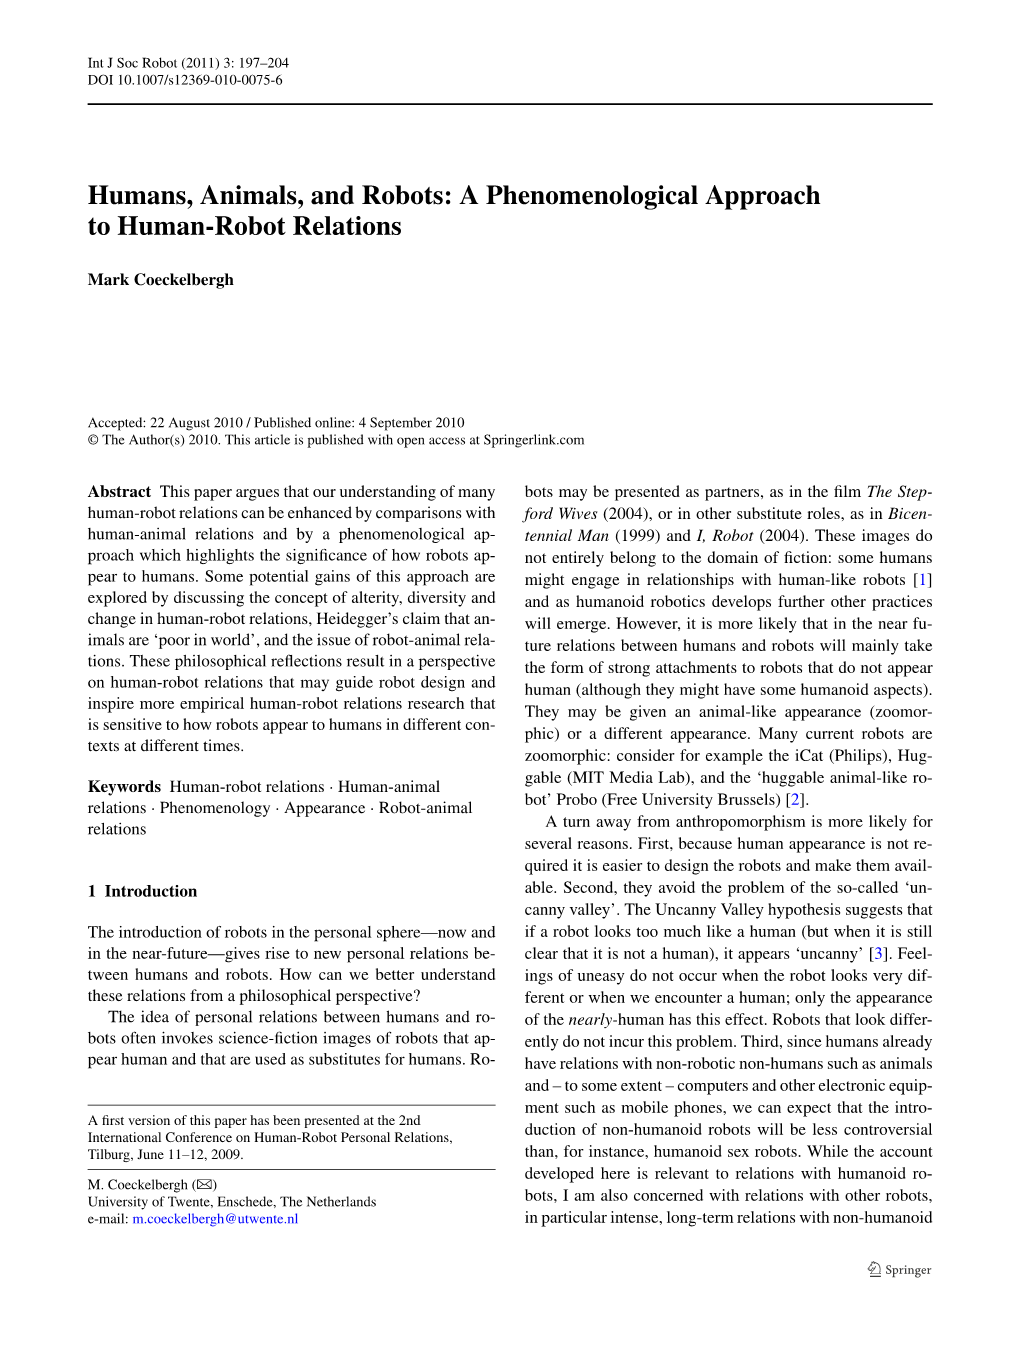 Humans, Animals, and Robots: a Phenomenological Approach to Human-Robot Relations